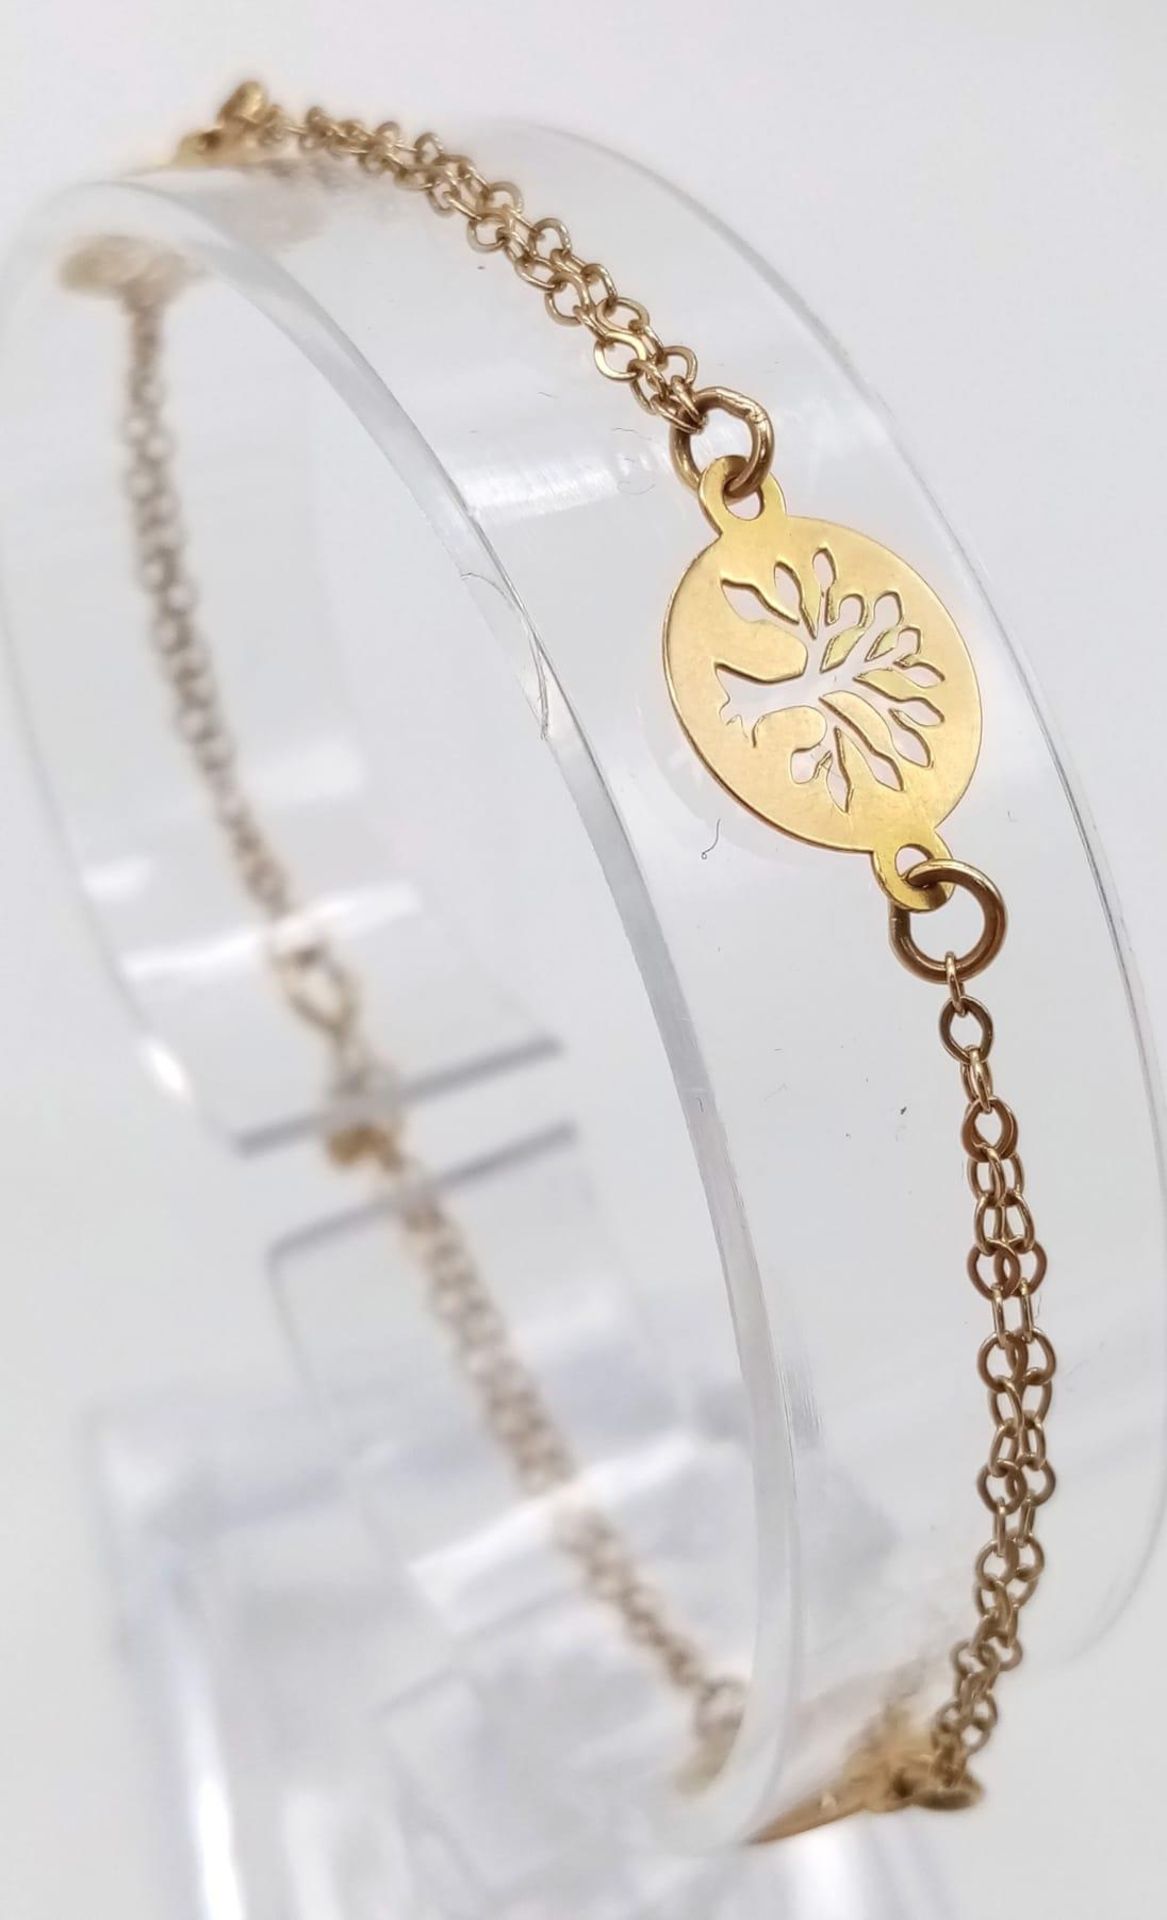 An 18K Yellow Gold Tree of Life Bracelet. 16cm. 2.2g weight. - Image 2 of 4